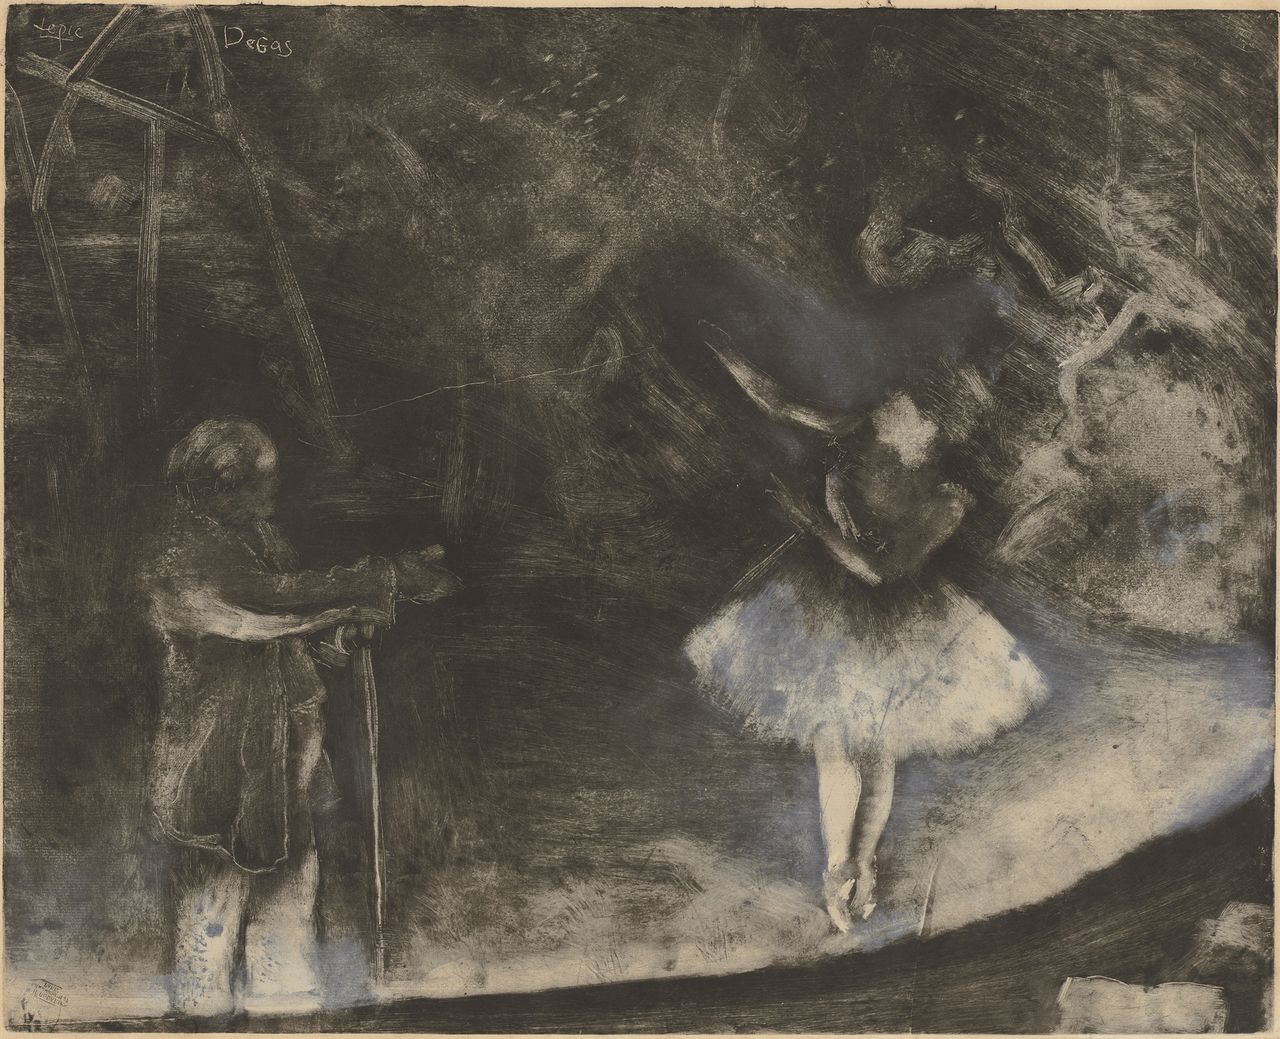 Edgar Degas (French, 1834–1917). The Ballet Master (Le Maître de ballet), c. 1876. White chalk or opaque watercolor over monotype on paper. Plate: 22 1/4 x 27 9/16 in. (56.5 x 70 cm), sheet: 24 7/16 x 33 7/16 in. (62 x 85 cm). National Gallery of Art, Washington, D.C. Rosenwald Collection, 1964.